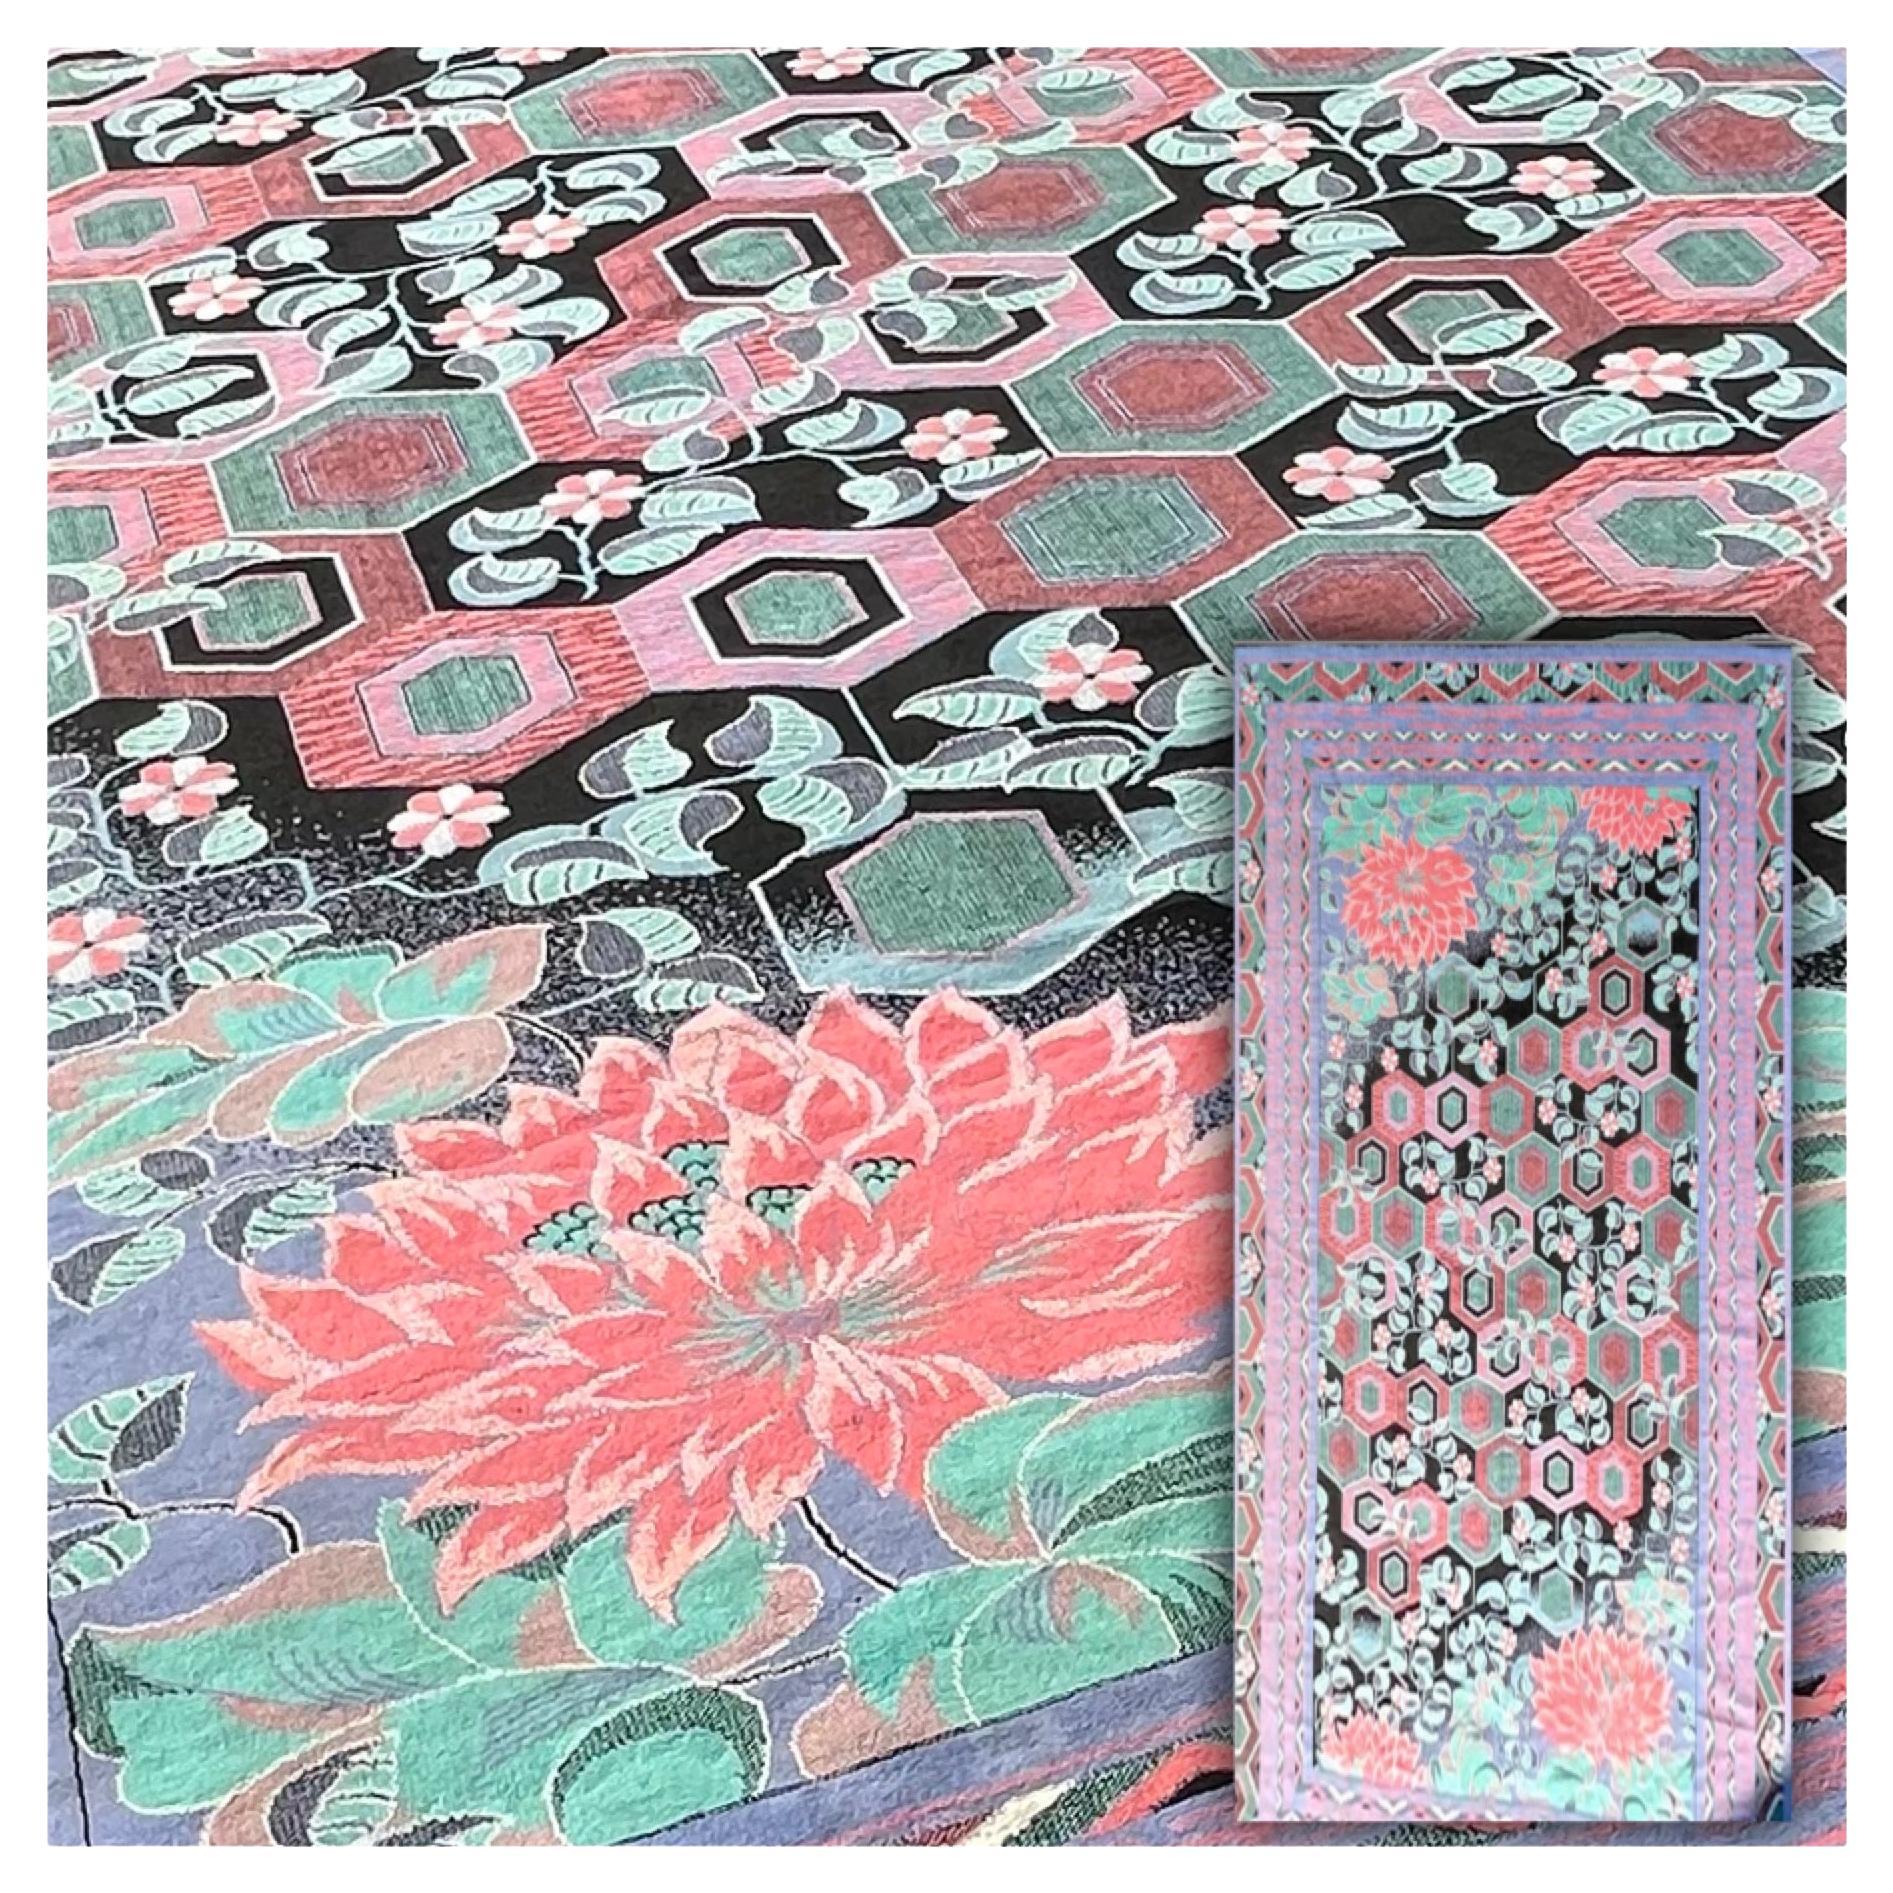 "Timeless Synthetic Rug Inspired By Famous Artist William Morris"